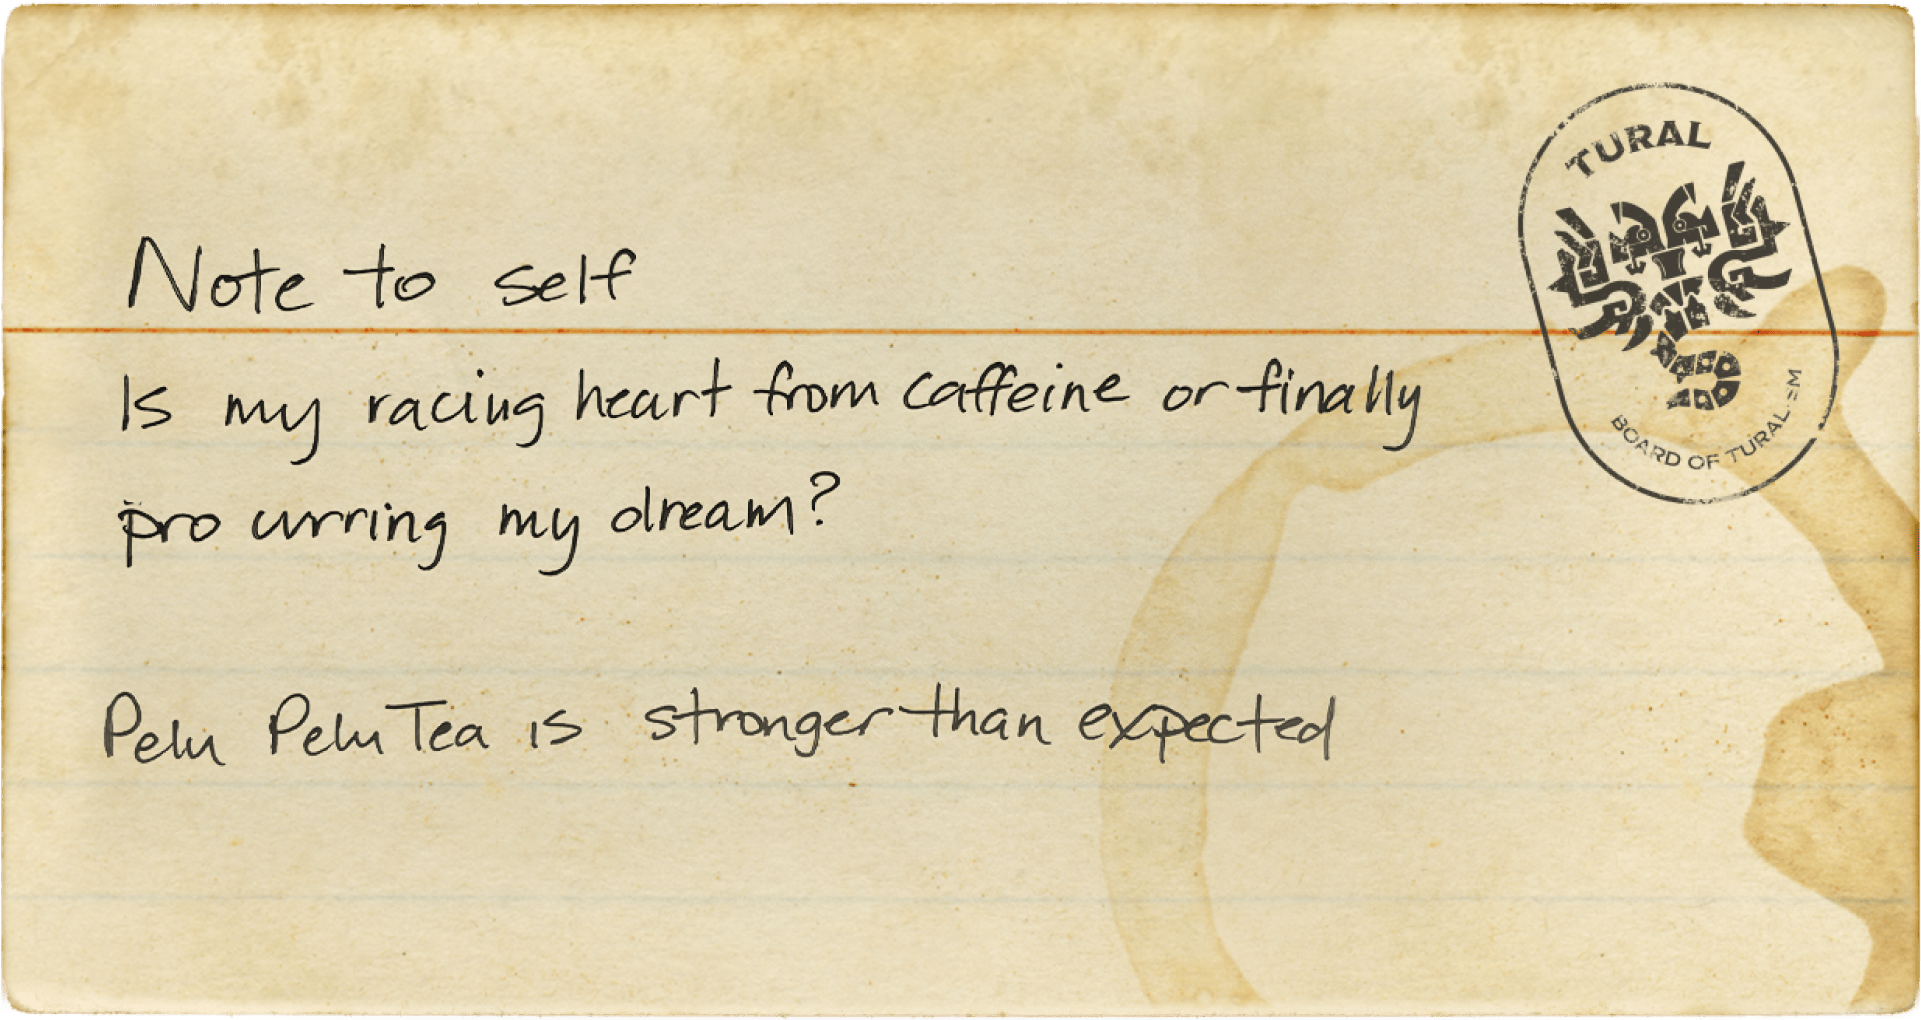 You found a note! It says: Note to self: Is my heart racing from caffeine or finally procuring my dream? Pelu Pelu Tea is stronger than expected.